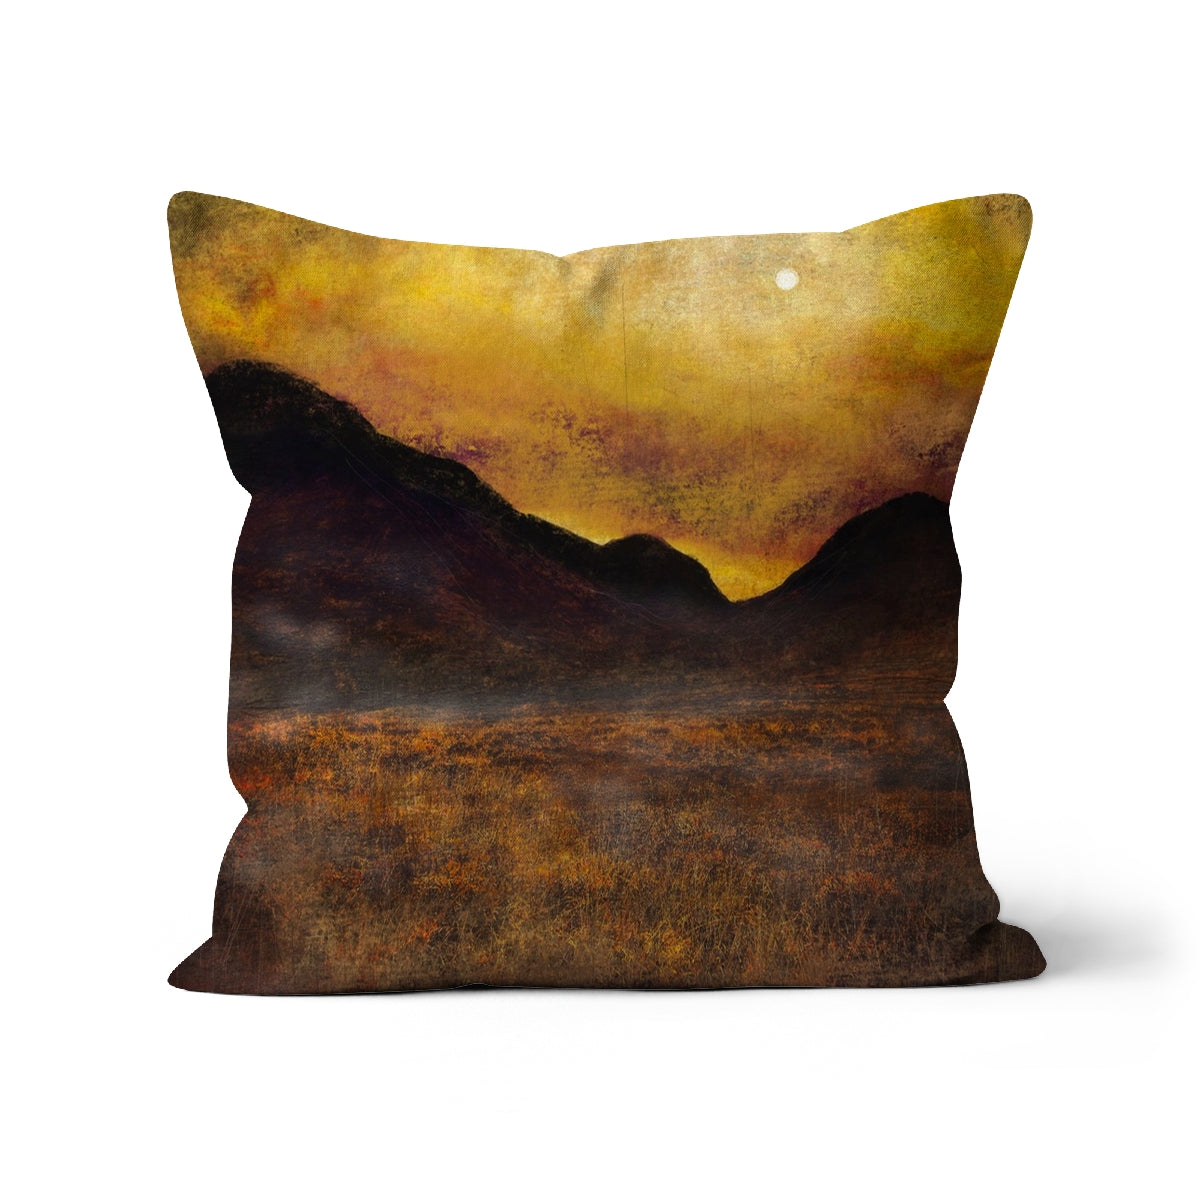 Glencoe Moonlight Art Gifts Cushion-Cushions-Glencoe Art Gallery-Faux Suede-24"x24"-Paintings, Prints, Homeware, Art Gifts From Scotland By Scottish Artist Kevin Hunter